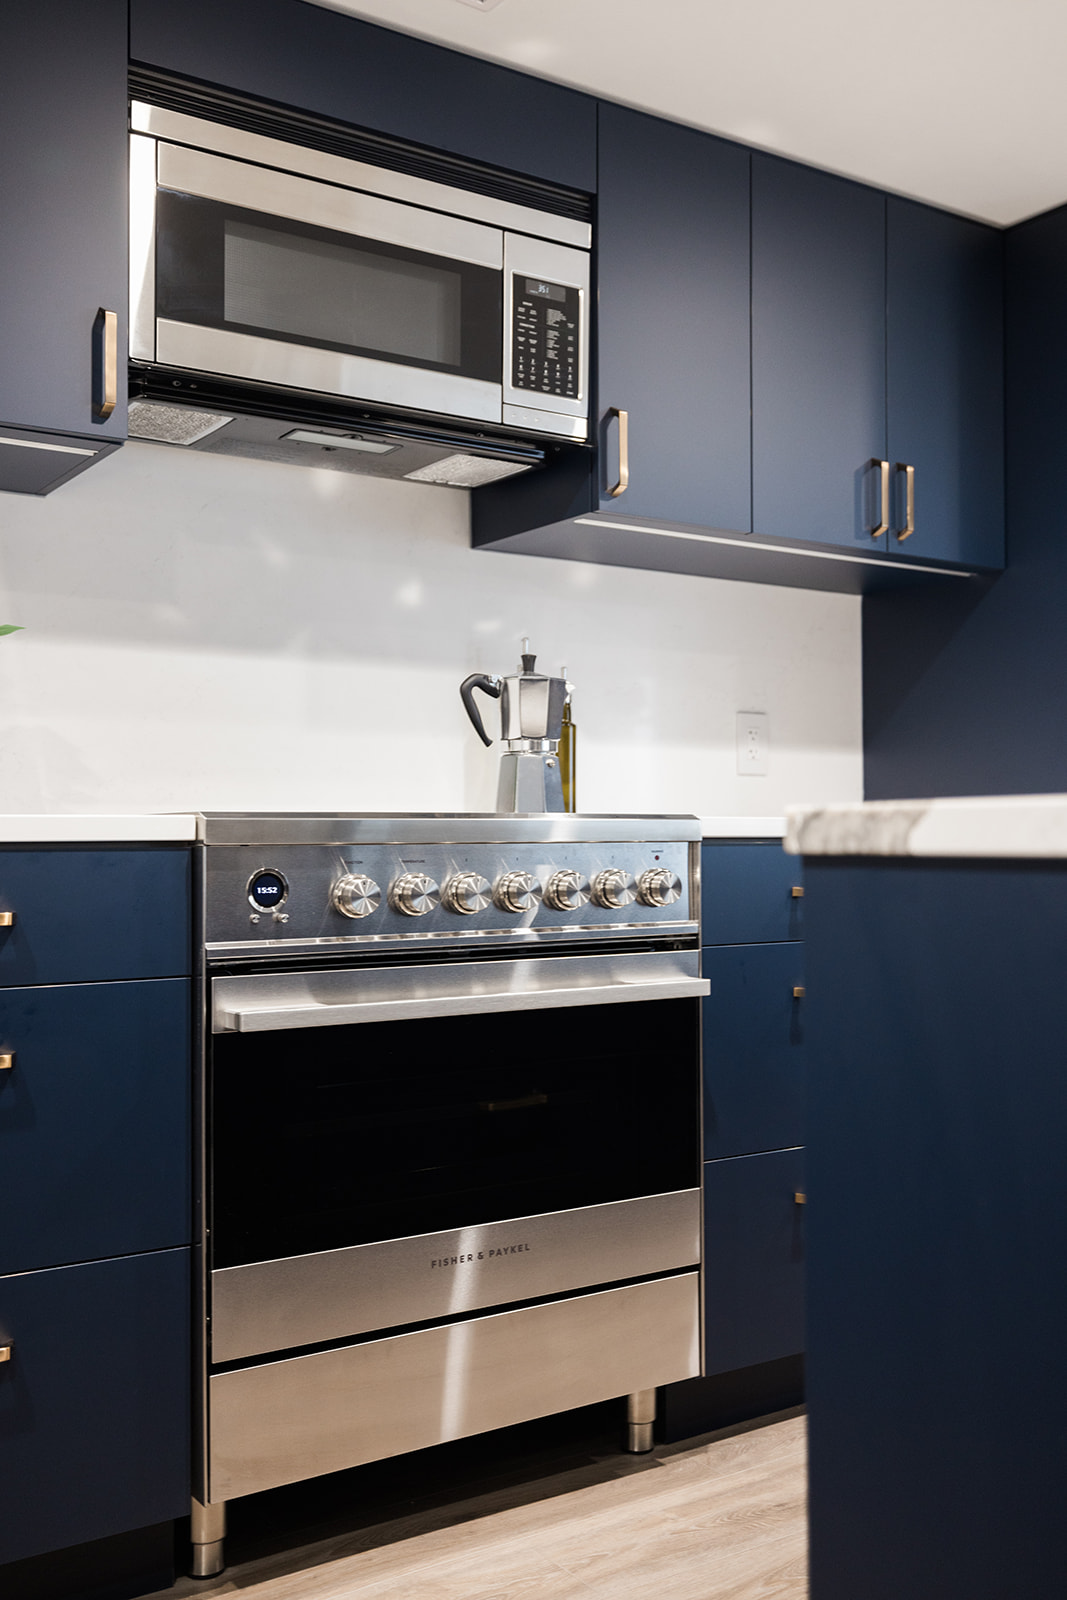 Stainless steel microwave and oven in luxury condo kitchen renovation in Toronto